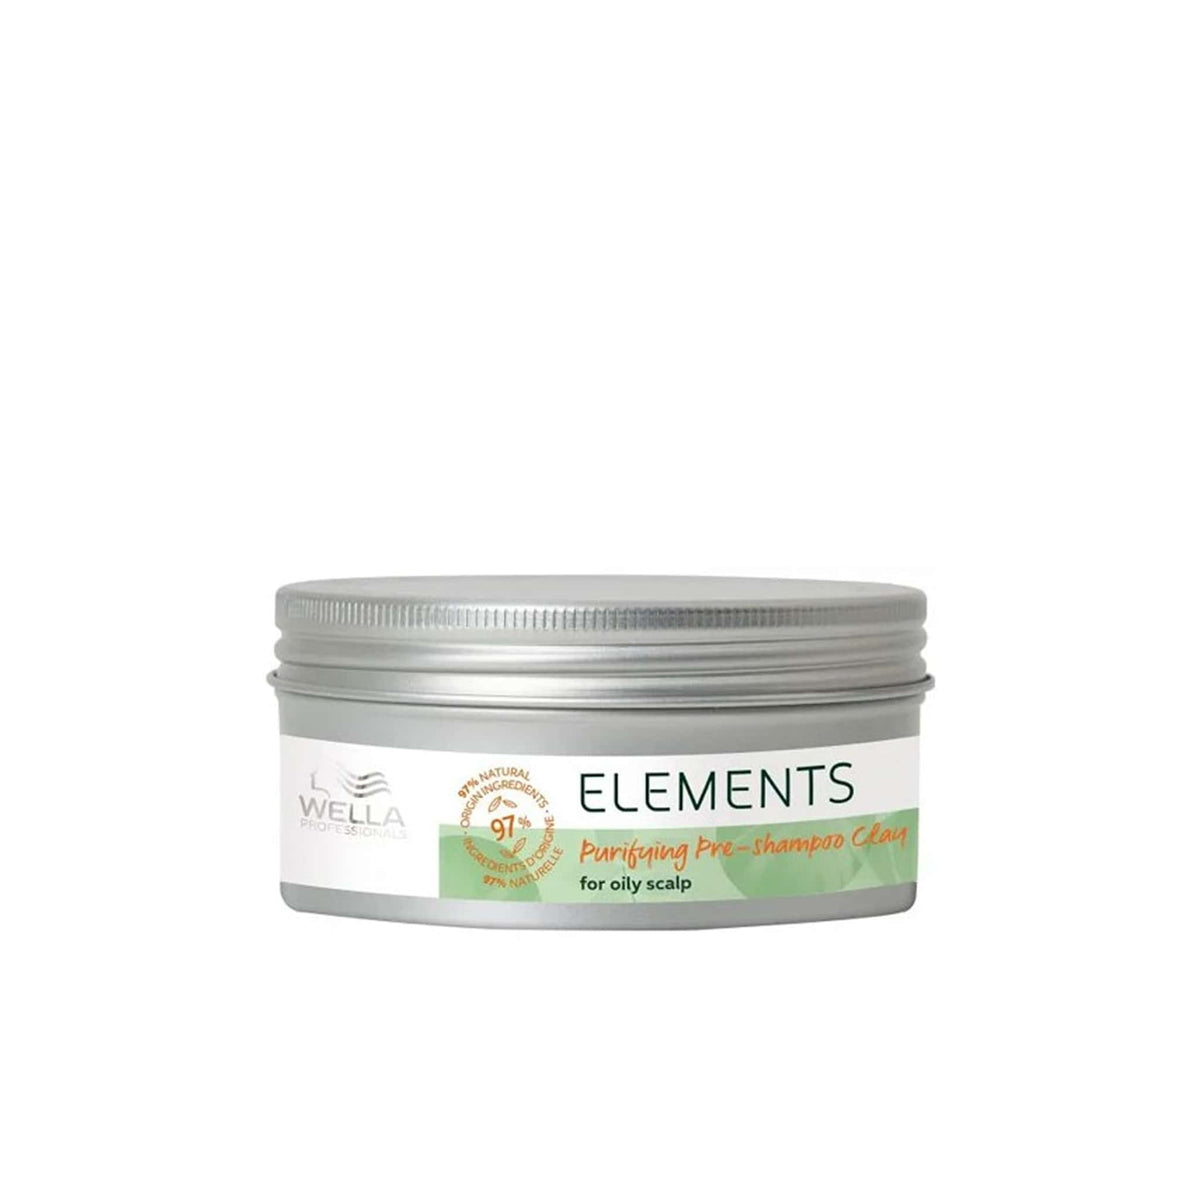 Wella Elements Purifying Pre Cleanse Clay 225ml